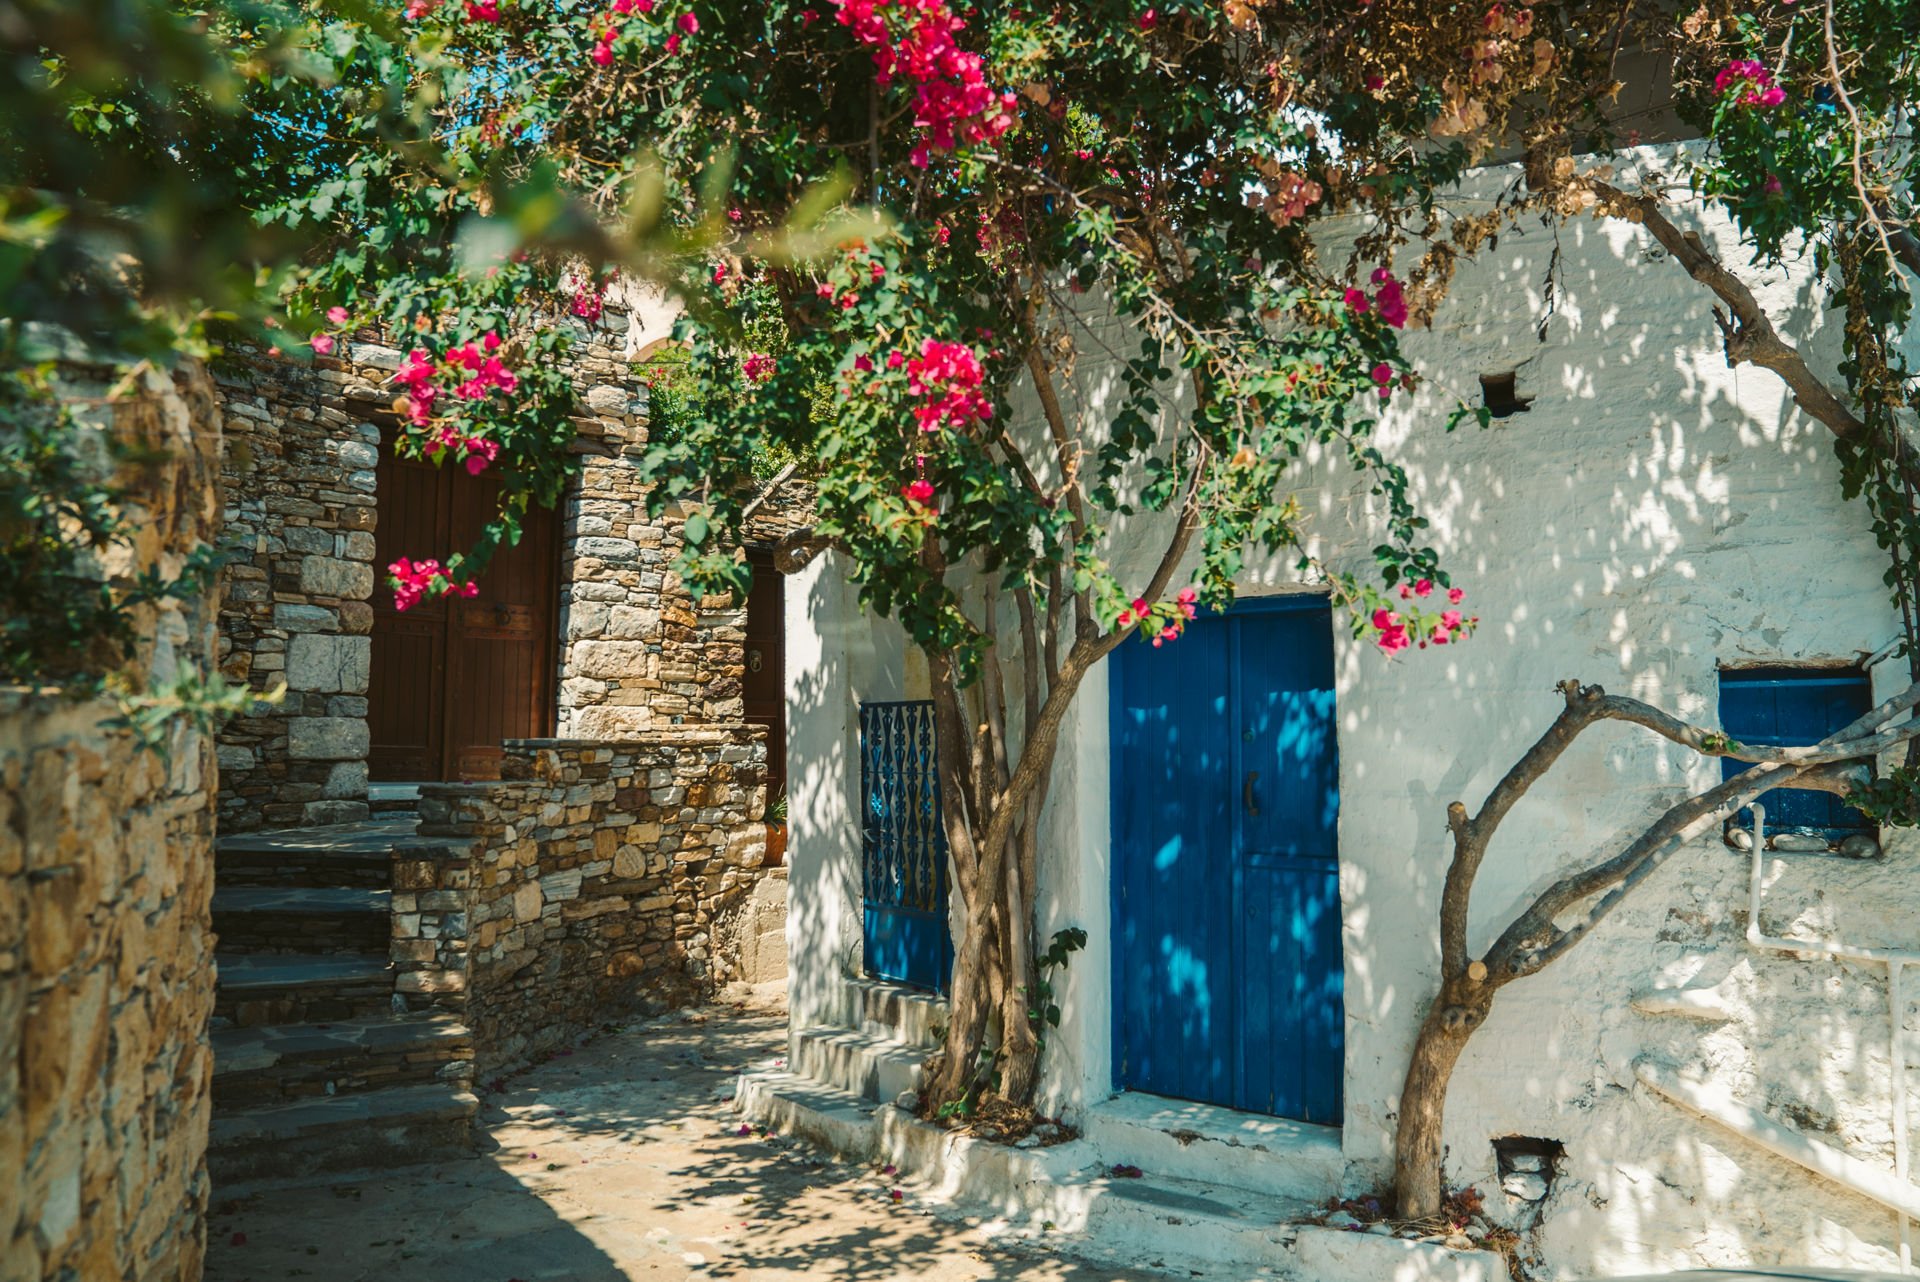 Sangri, a village with an Upper and Lower part, combining medieval architecture and Cycladic